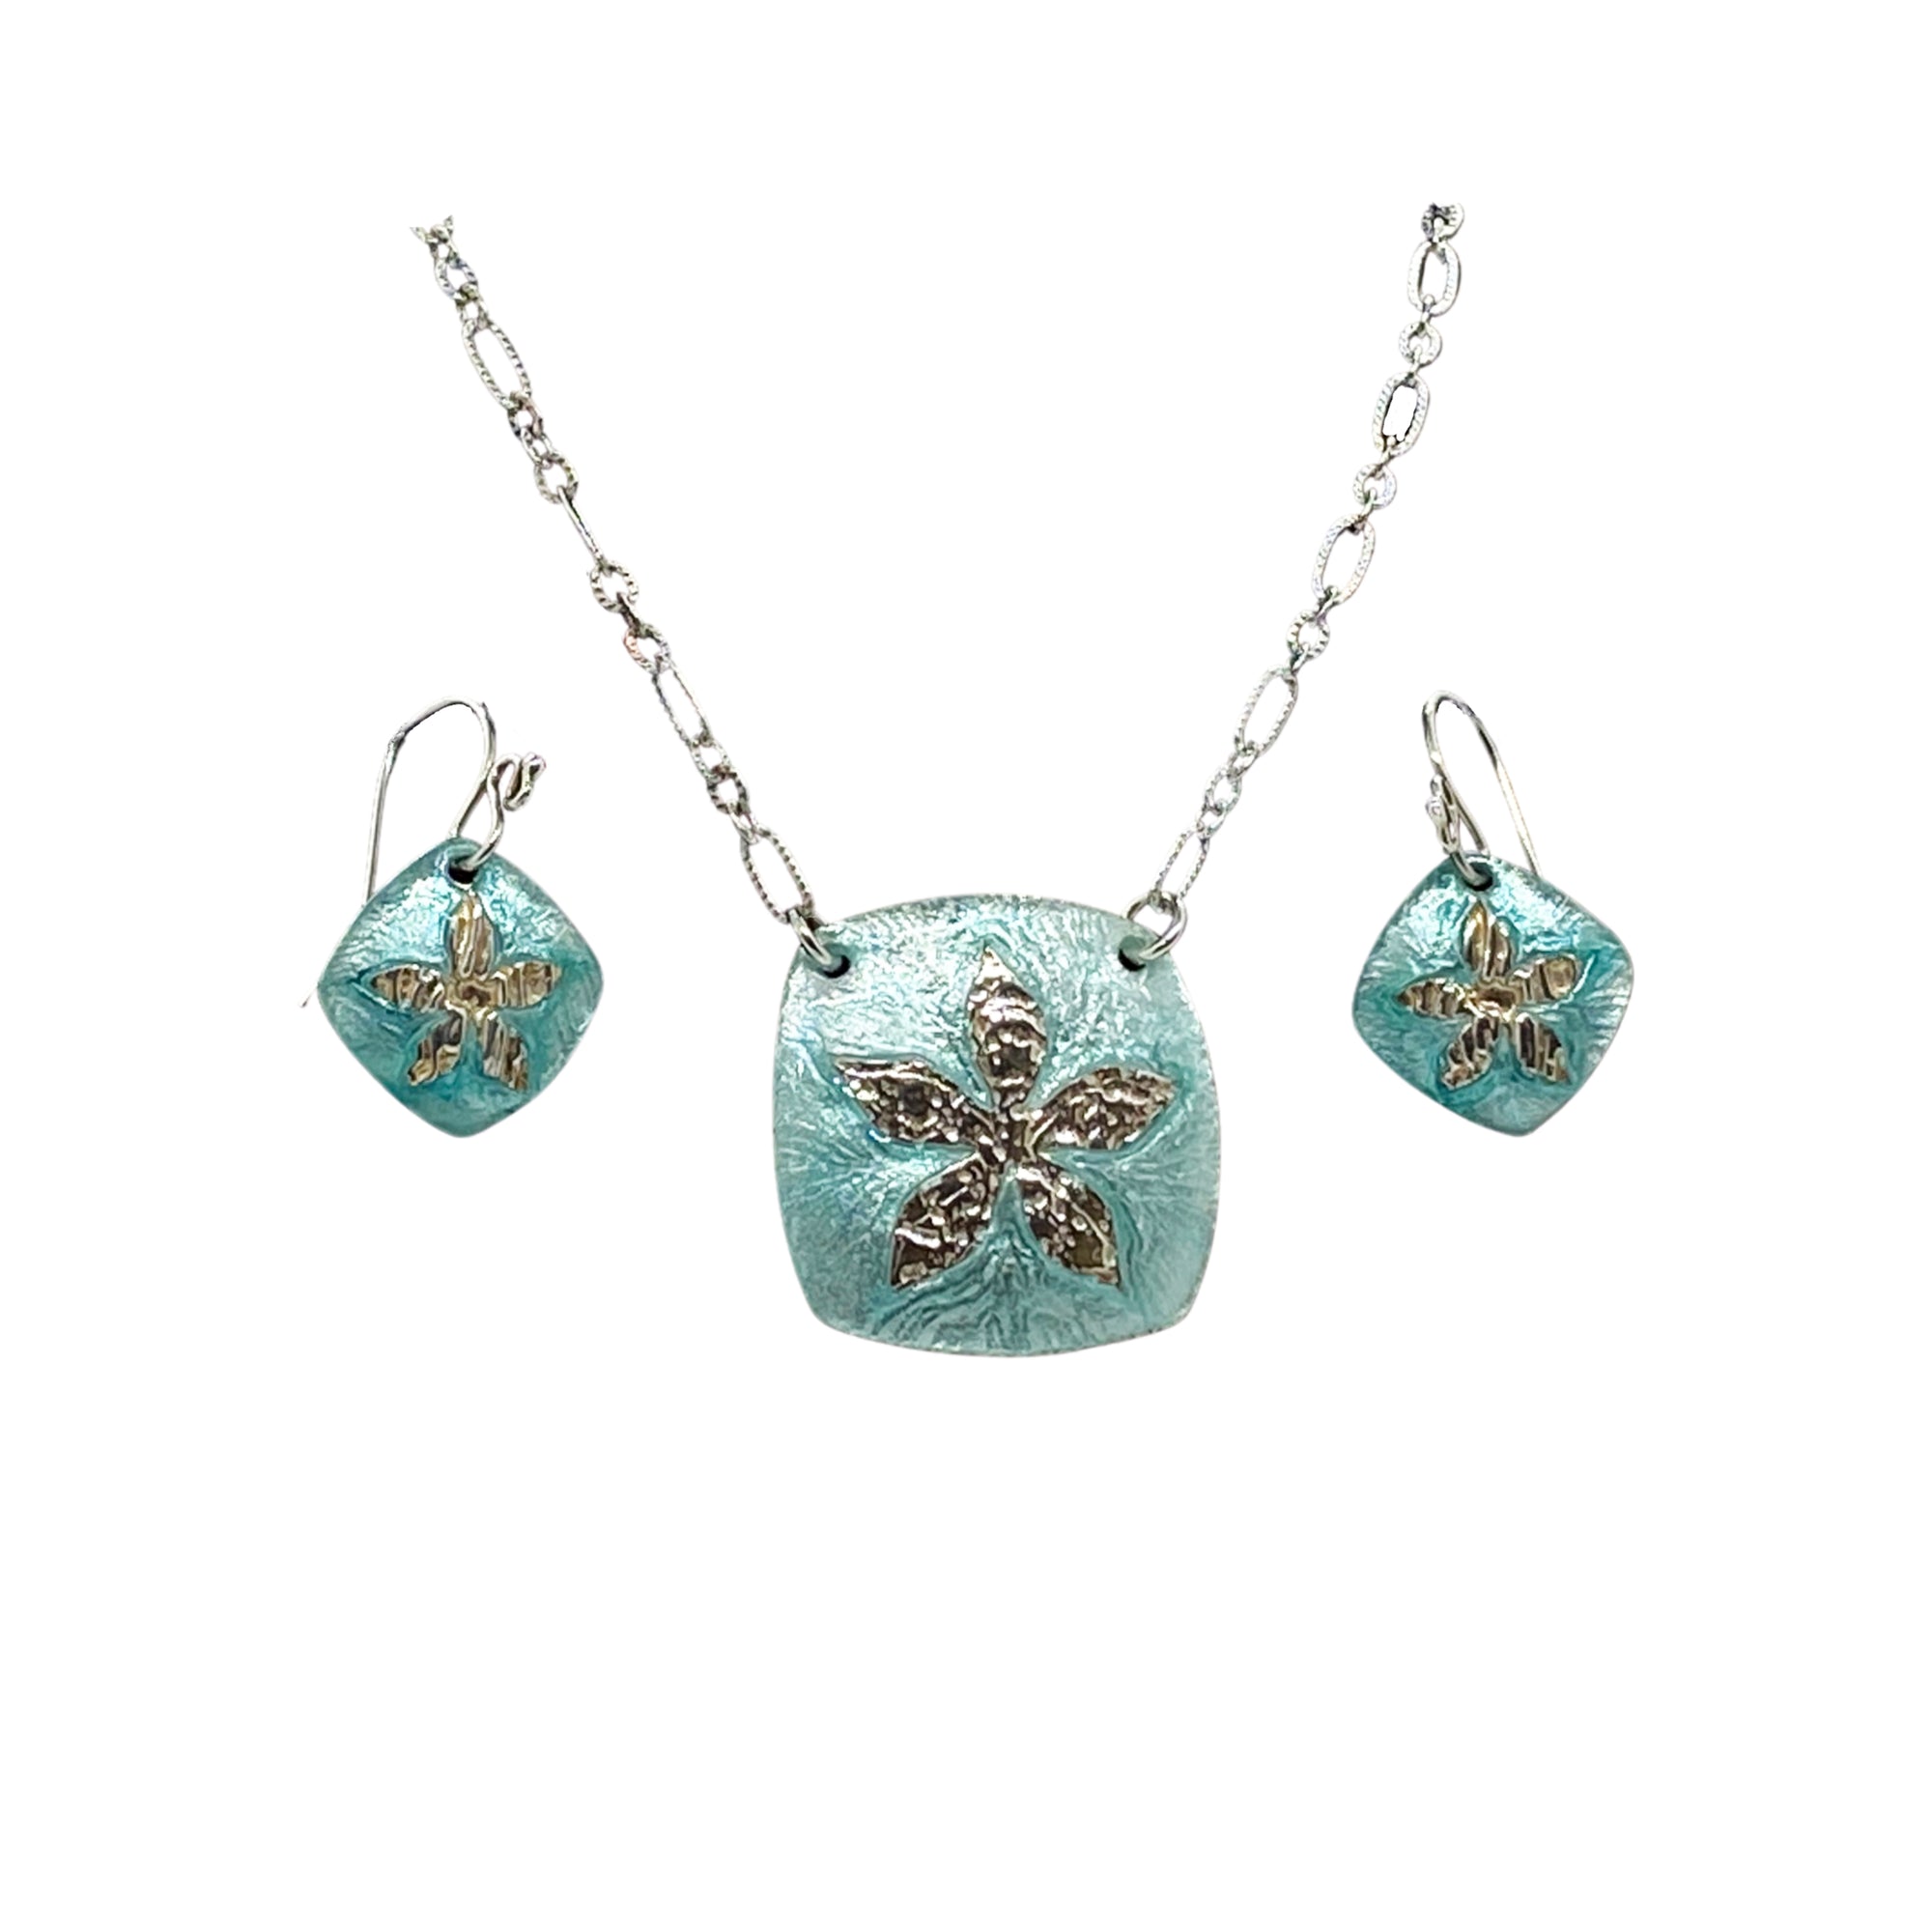 Camille Patton Pearly Posy Cosmos Jewelry Set S01